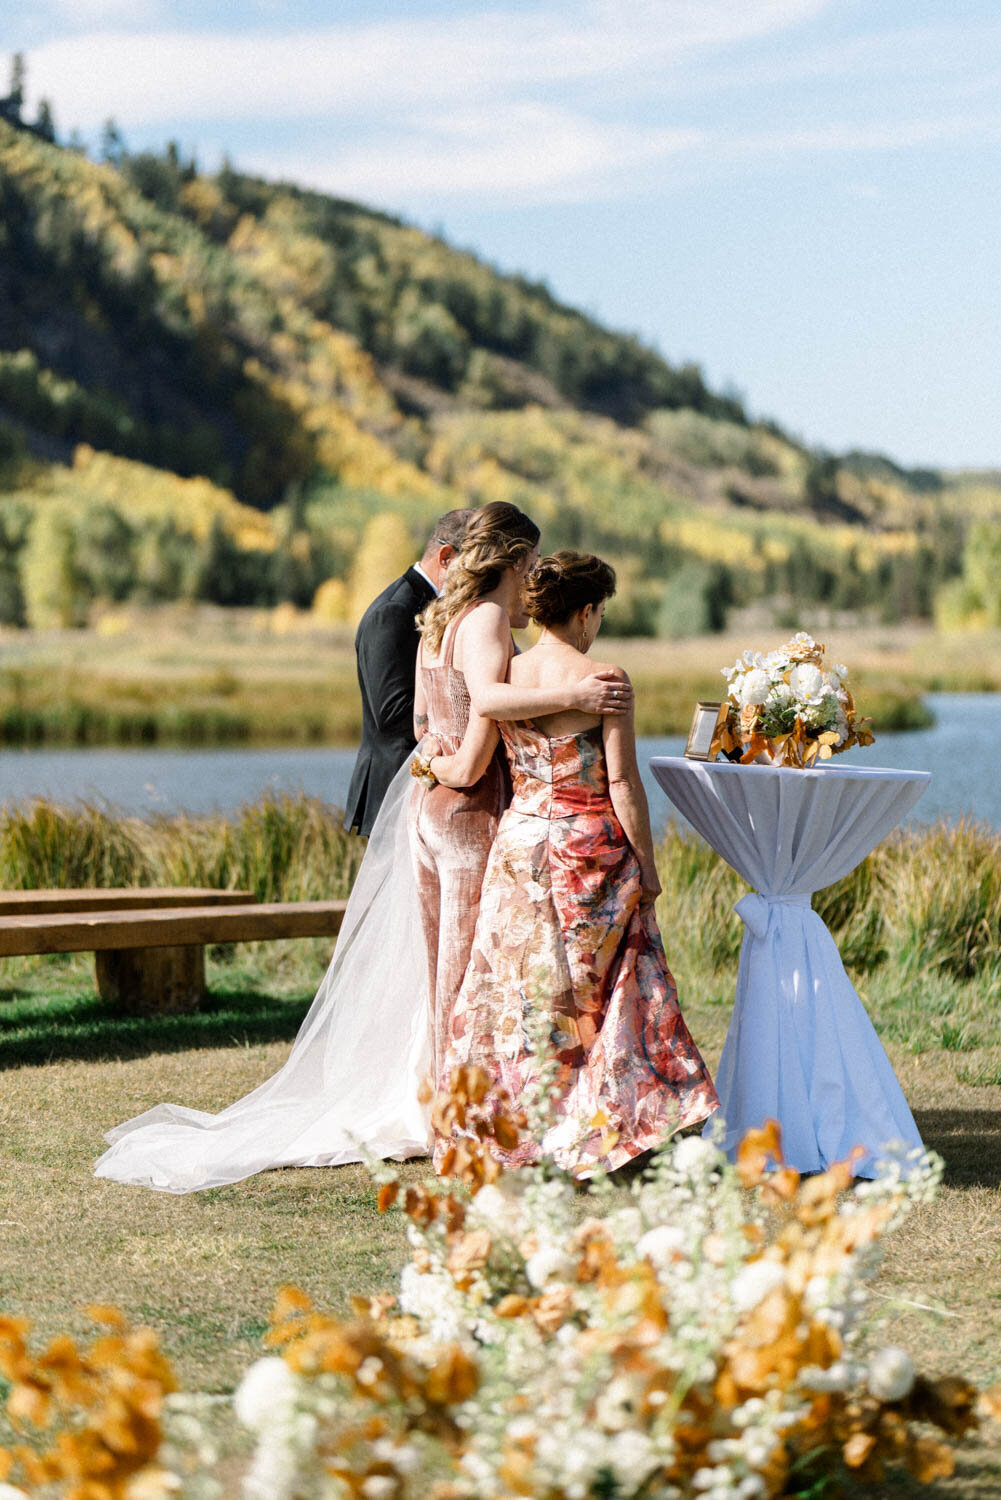 C+A_Camp_Hale_Wedding_Vail_Colorado_by_Diana_Coulter_Web-40